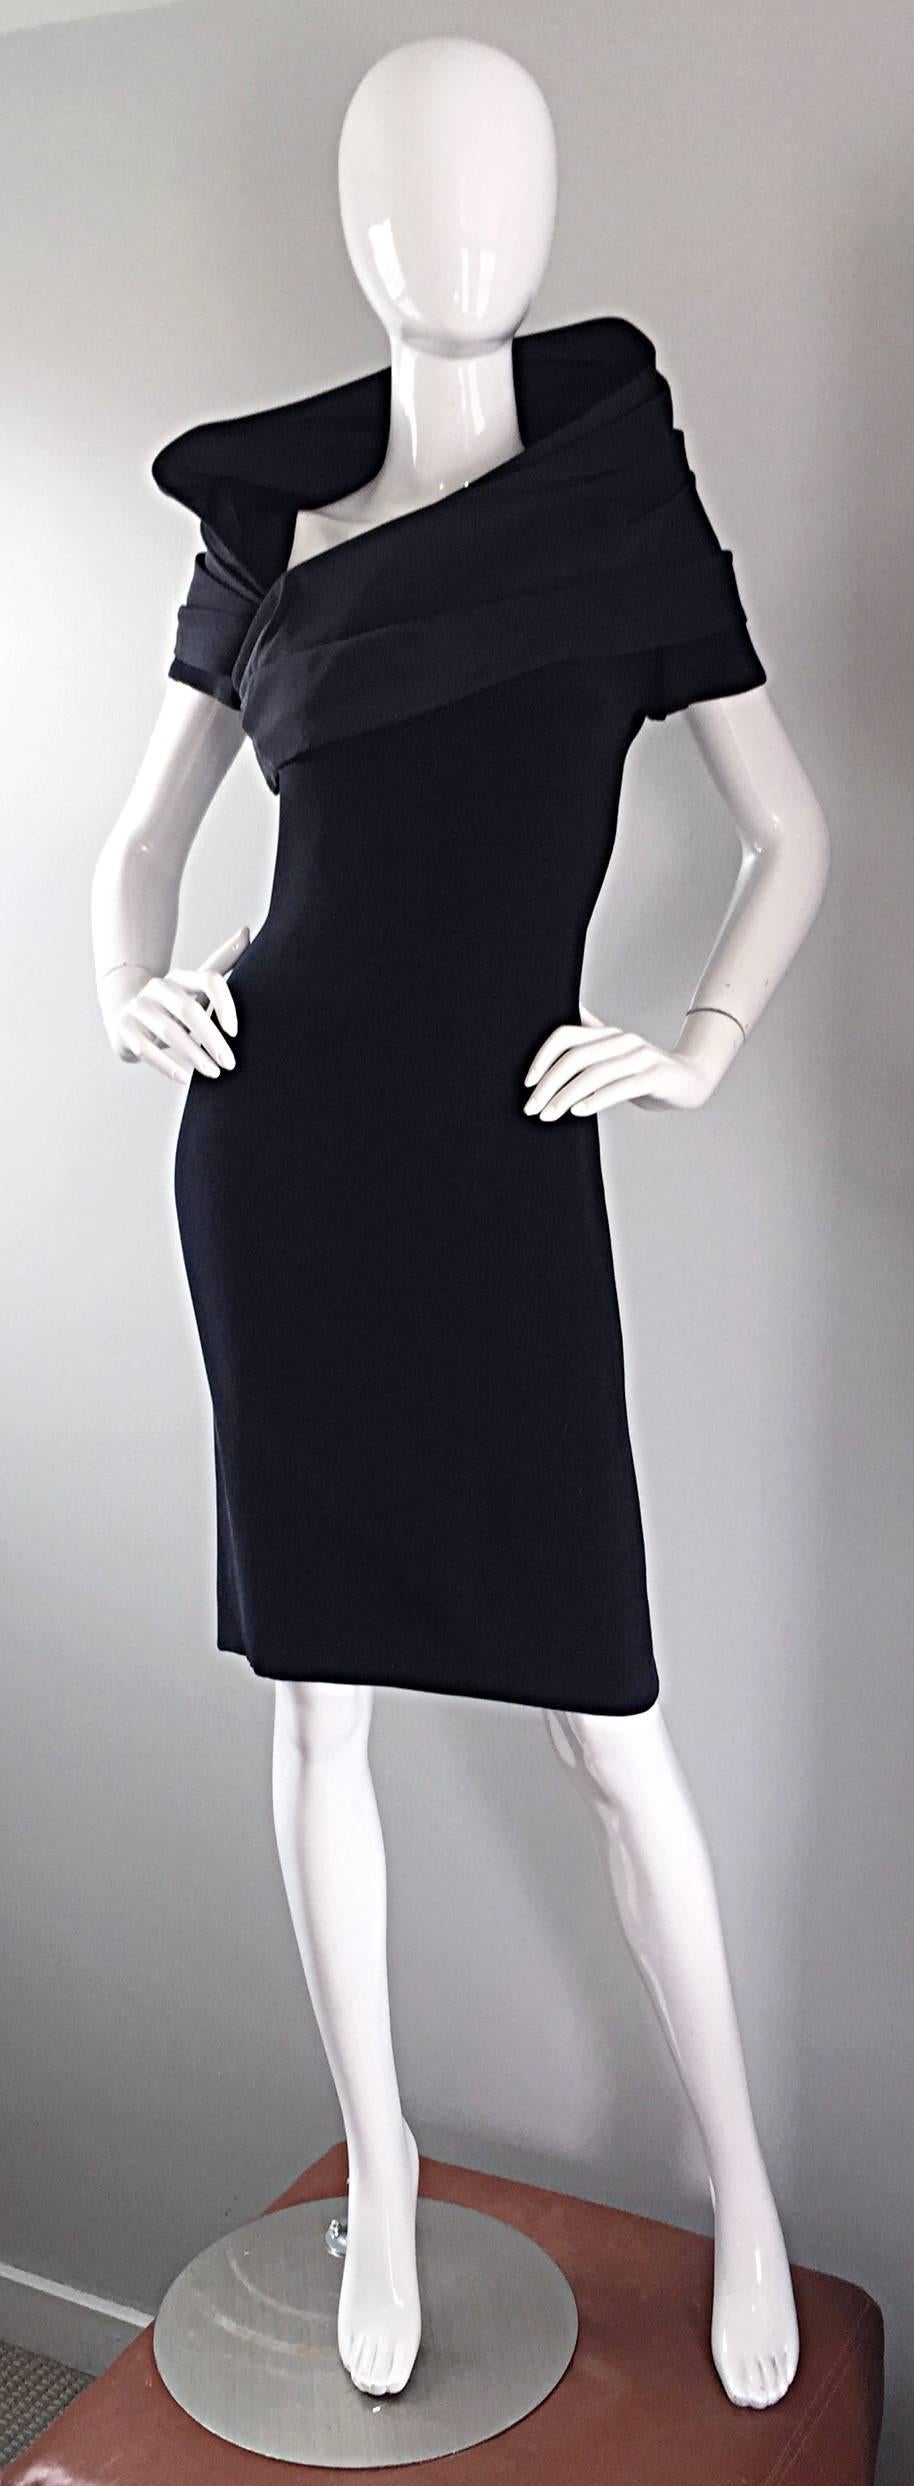 Incredible vintage 1990s 90s BILL BLASS for NEIMAN MARCUS little black dress! Features an elegant and extravagant silk taffeta collar that can be worn multiple ways. The perfect little black dress that is a timeless addition to any wardrobe! Bodycon